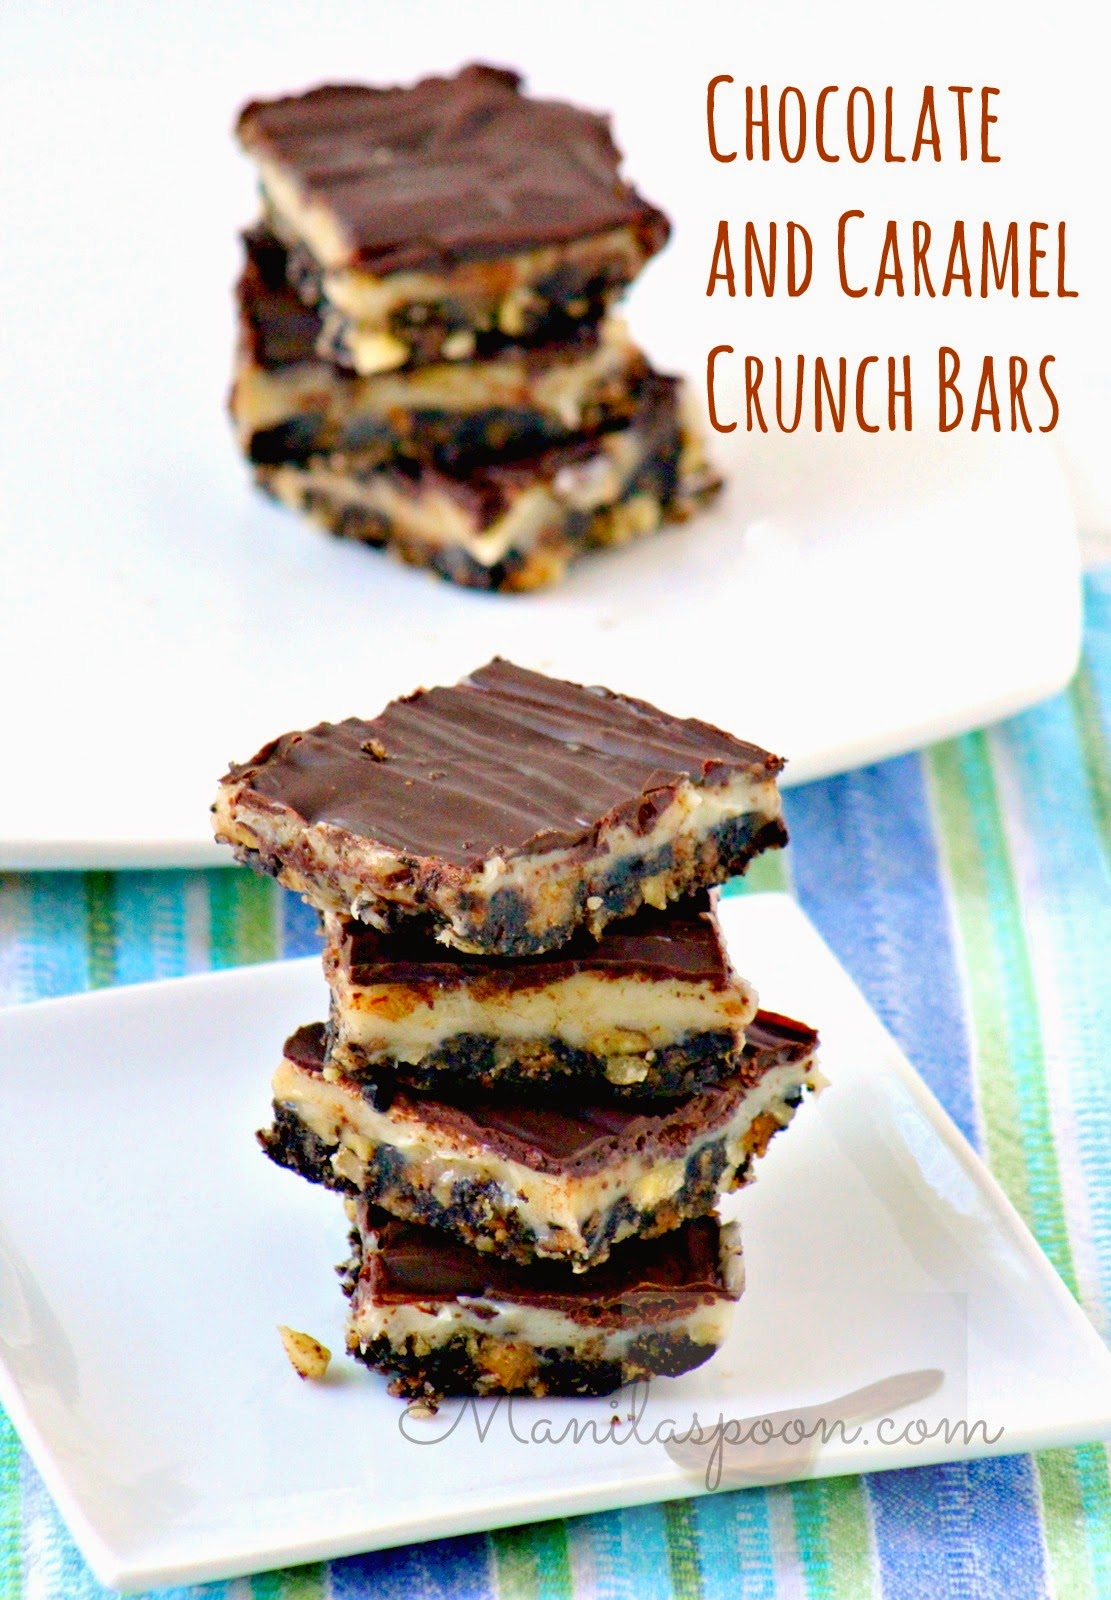 Layers of pecan crumb crust, delicious caramel filling and then melted chocolate on top - how can you resist these No Bake Chocolate and Caramel Crunch Bars? #nobake #chocolate #caramel #bars #desserts #sweets